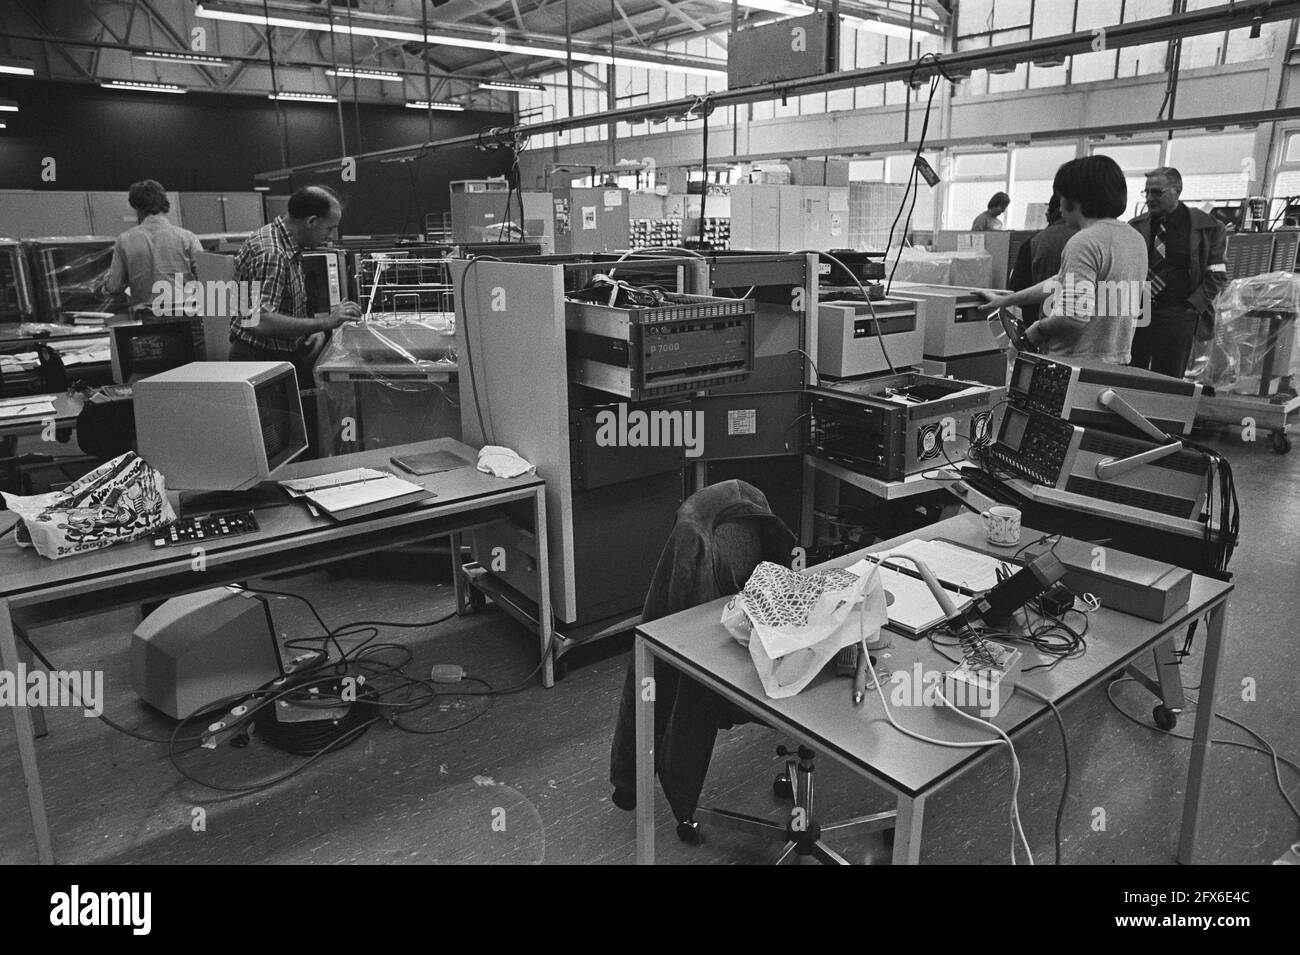 The staff of the company that manufactures computer equipment works as usual, October 27, 1981, businesses, computers, employees, The Netherlands, 20th century press agency photo, news to remember, documentary, historic photography 1945-1990, visual stories, human history of the Twentieth Century, capturing moments in time Stock Photo